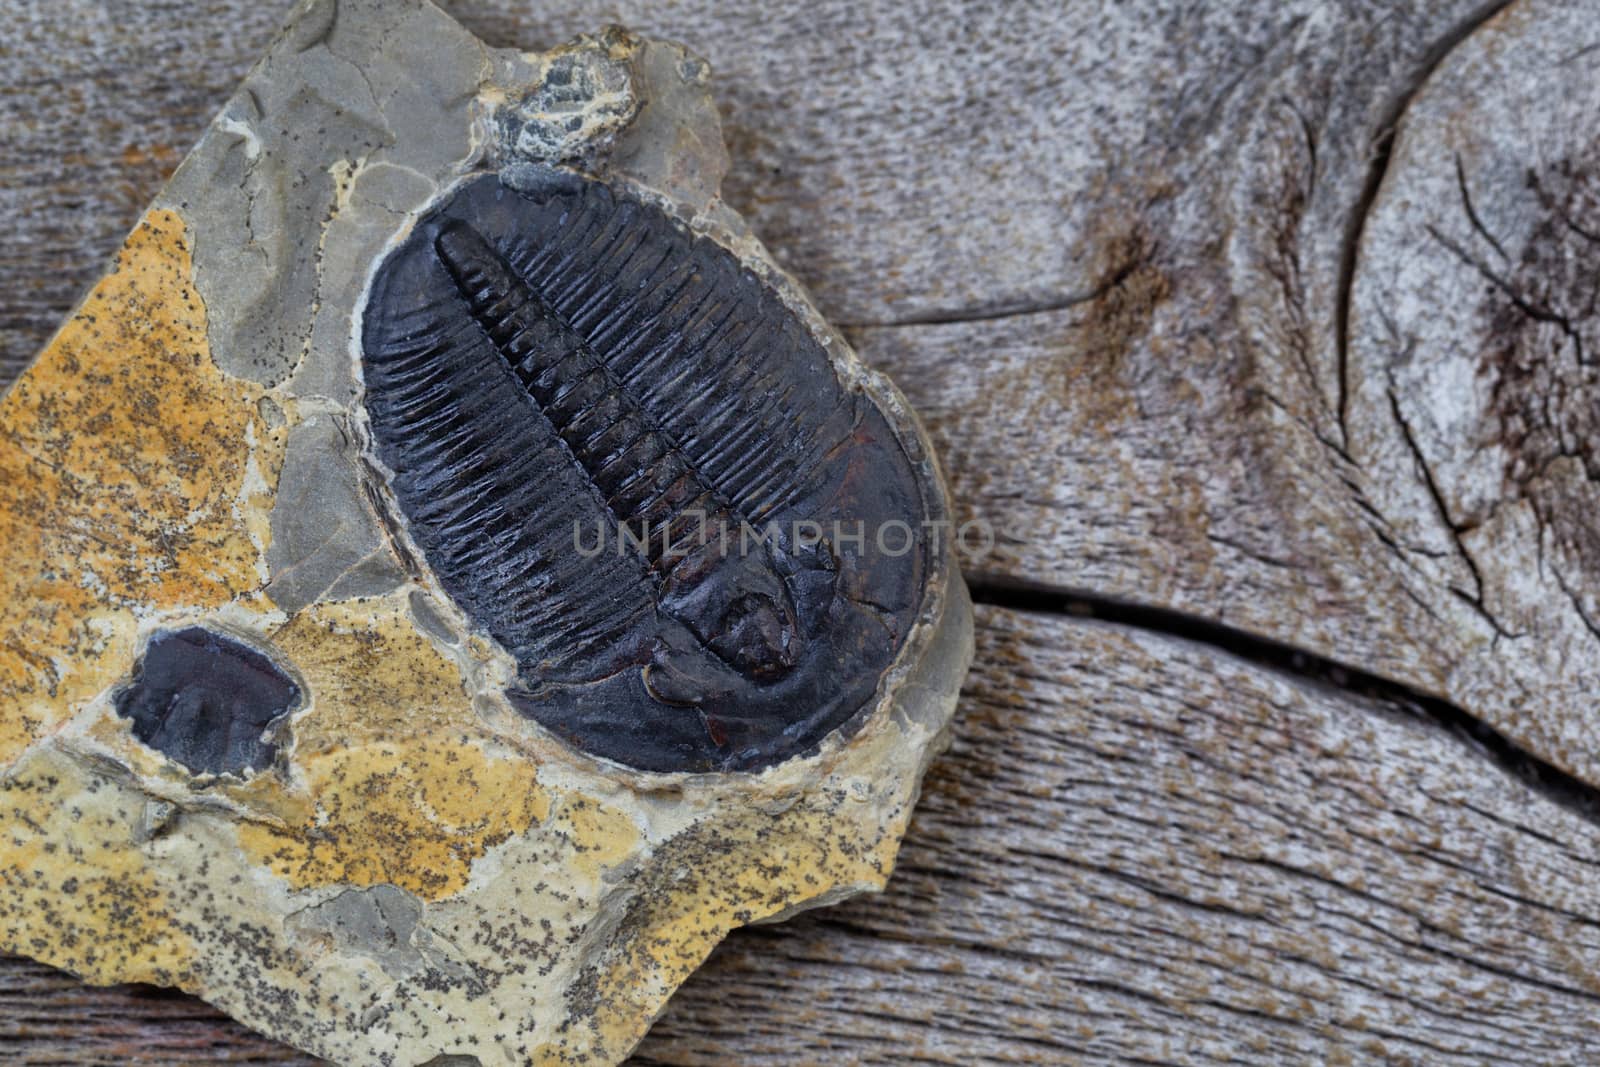 Single perfect fossilized trilobite in close up view  by tab1962